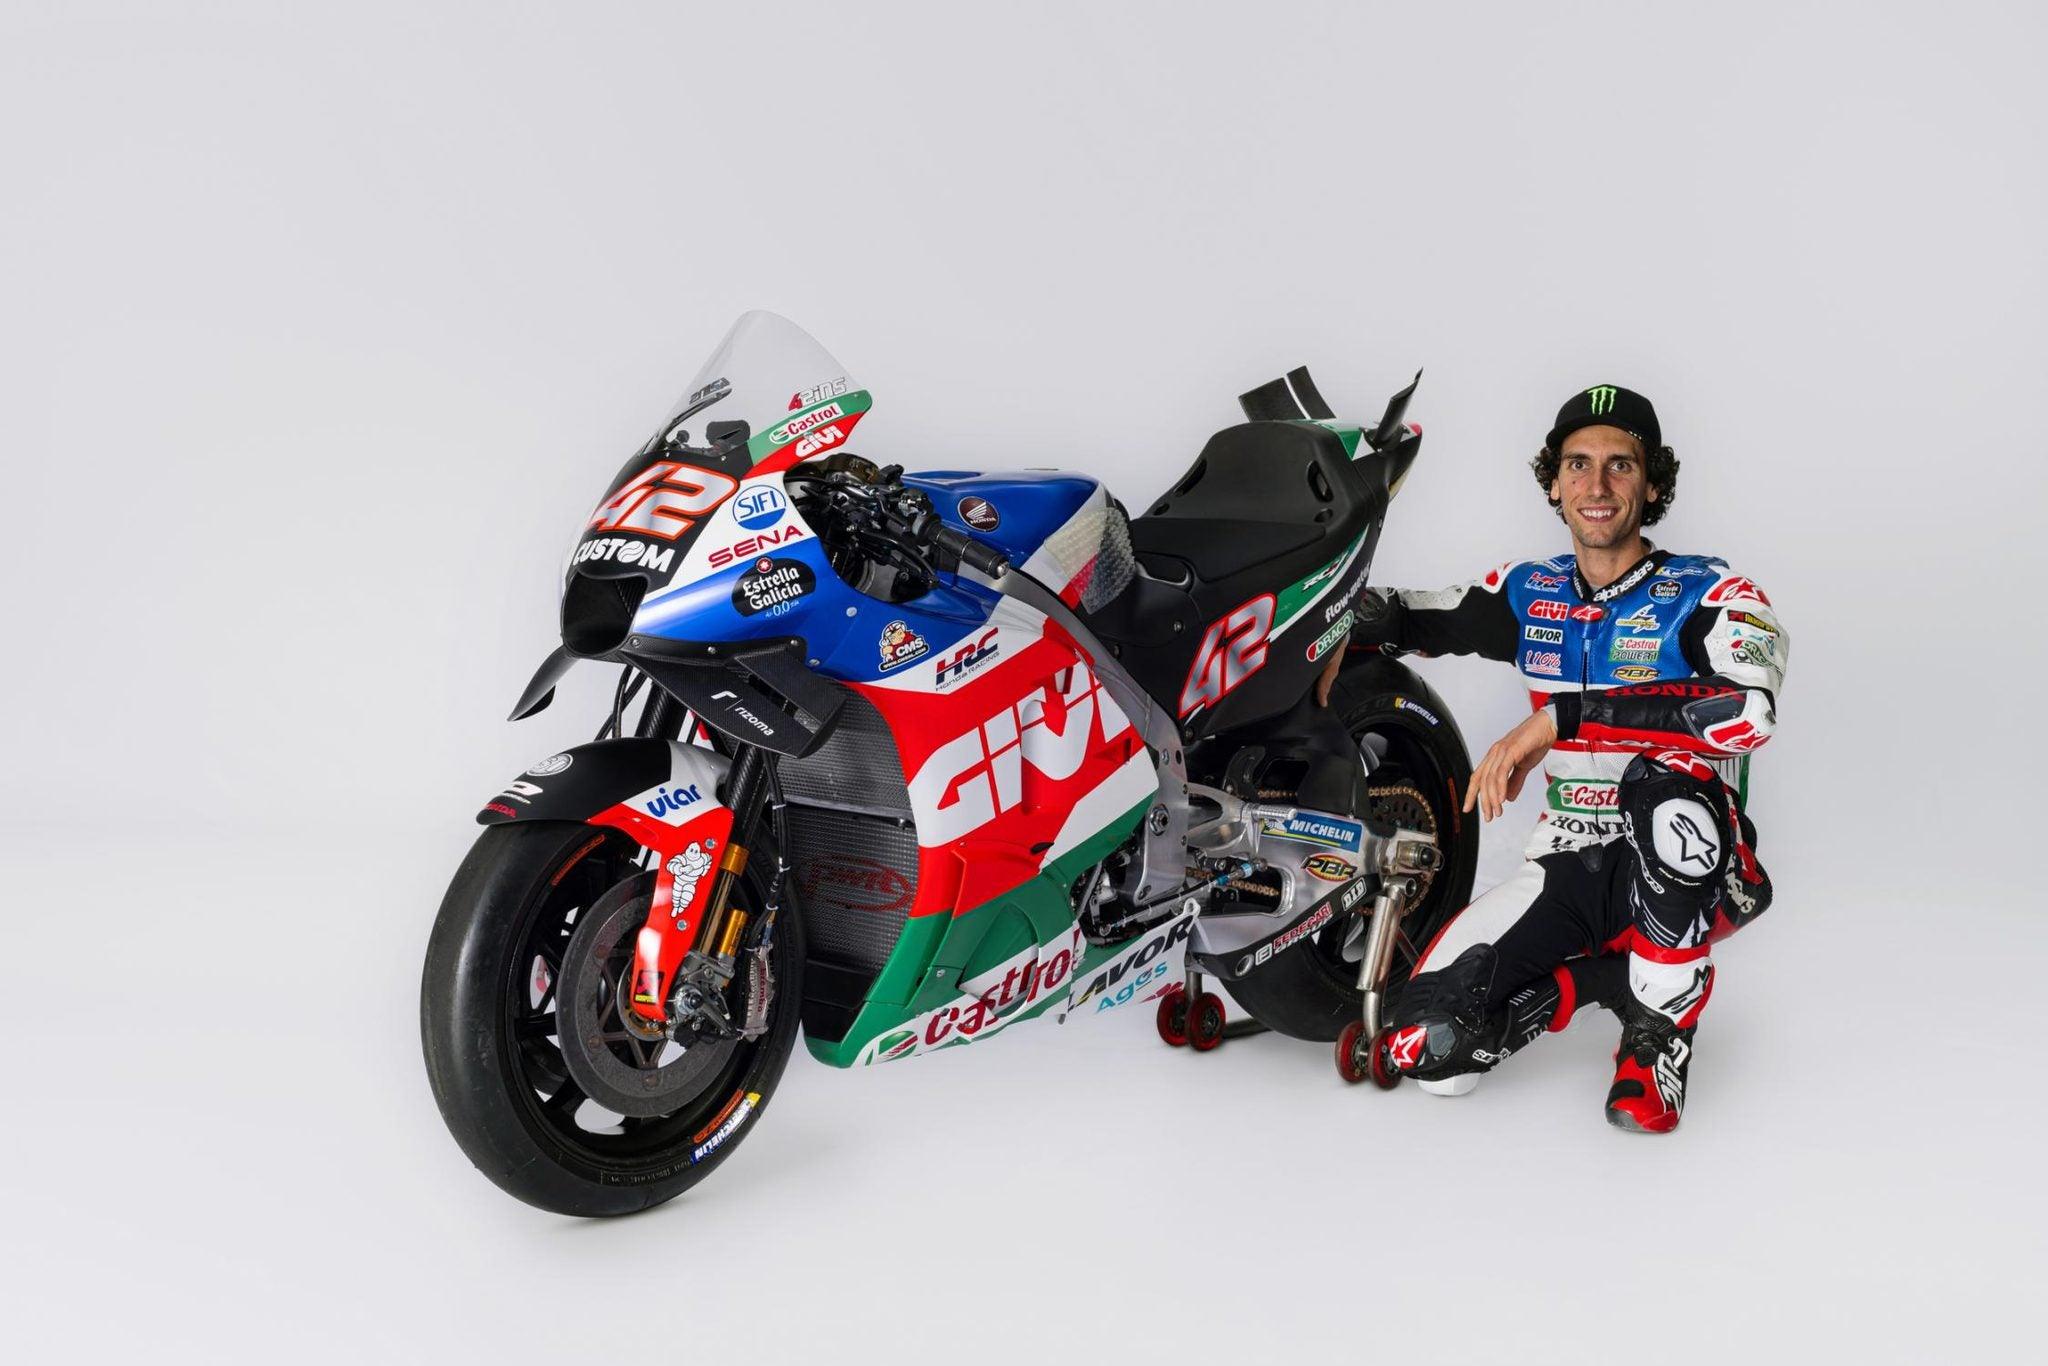 Alex Rins in new colors!